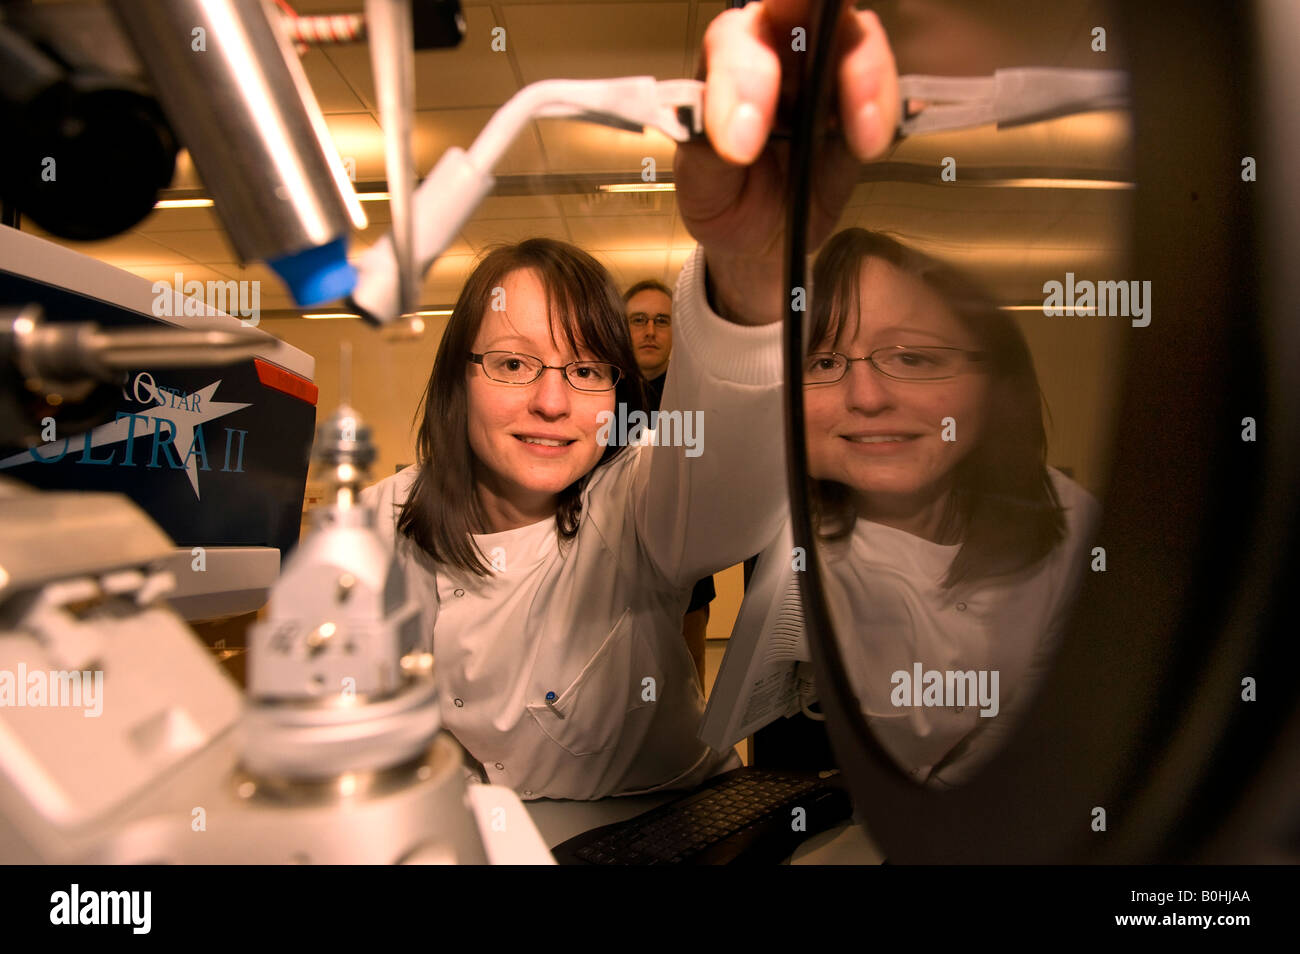 setting up a physics experiment at Oxford University post grad research lab Stock Photo